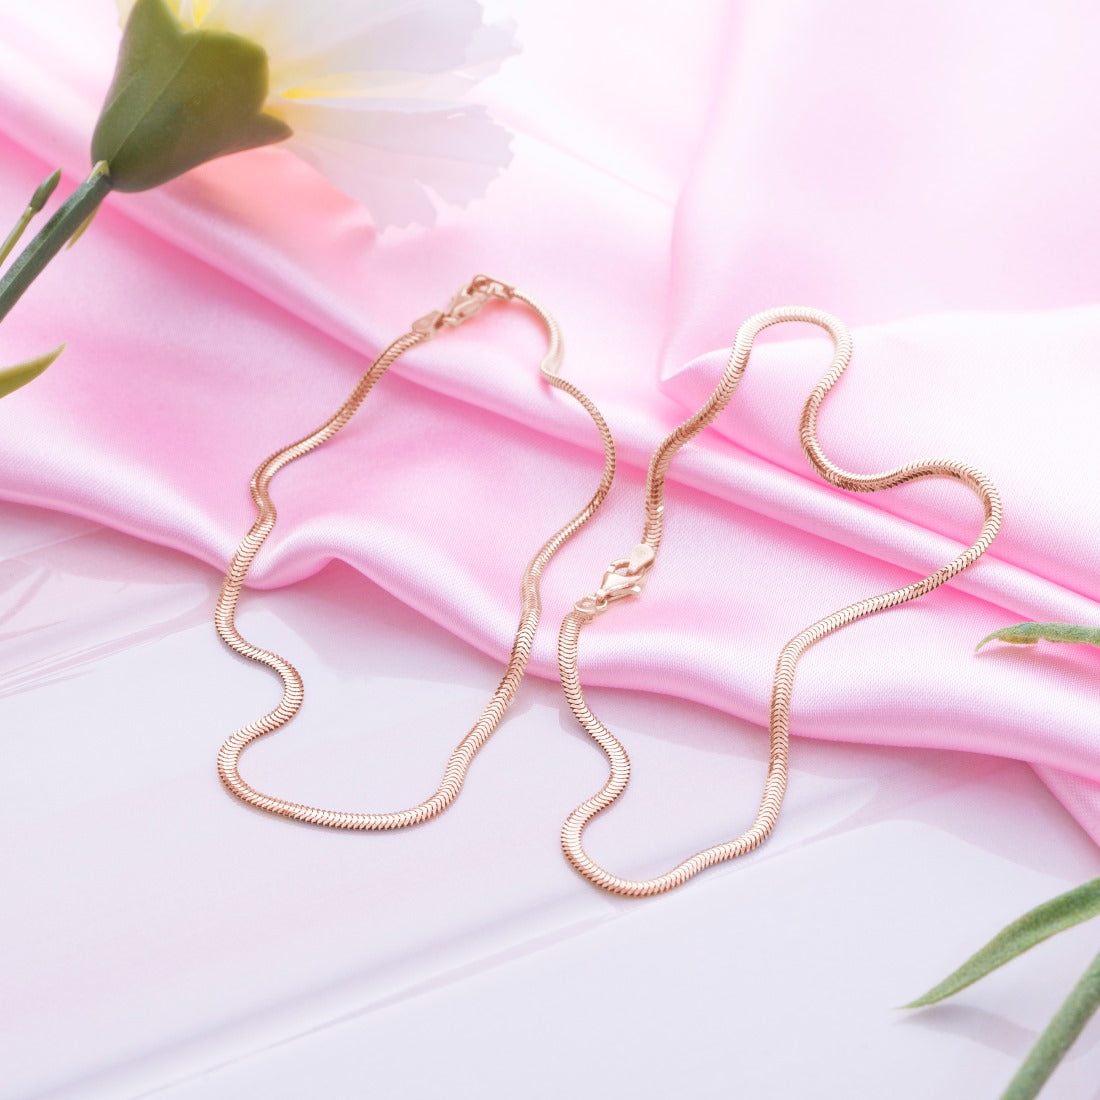 Rosy Radiance Rose Gold-Plated 925 Sterling Silver Anklet